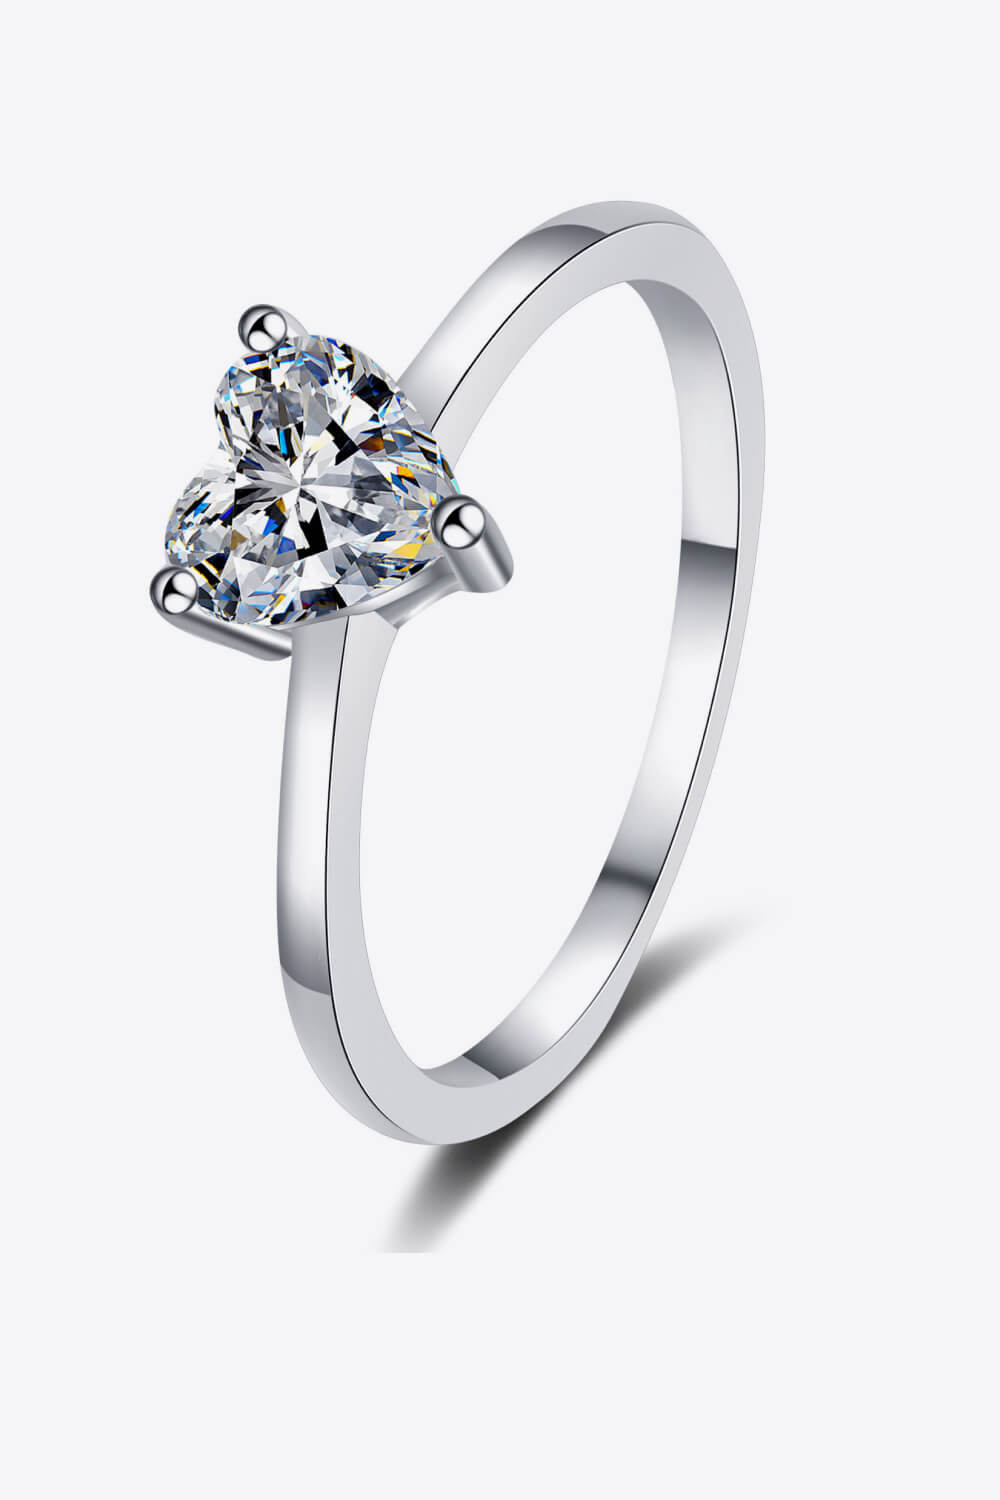 Heart-Shaped Moissanite Solitaire Ring Image2